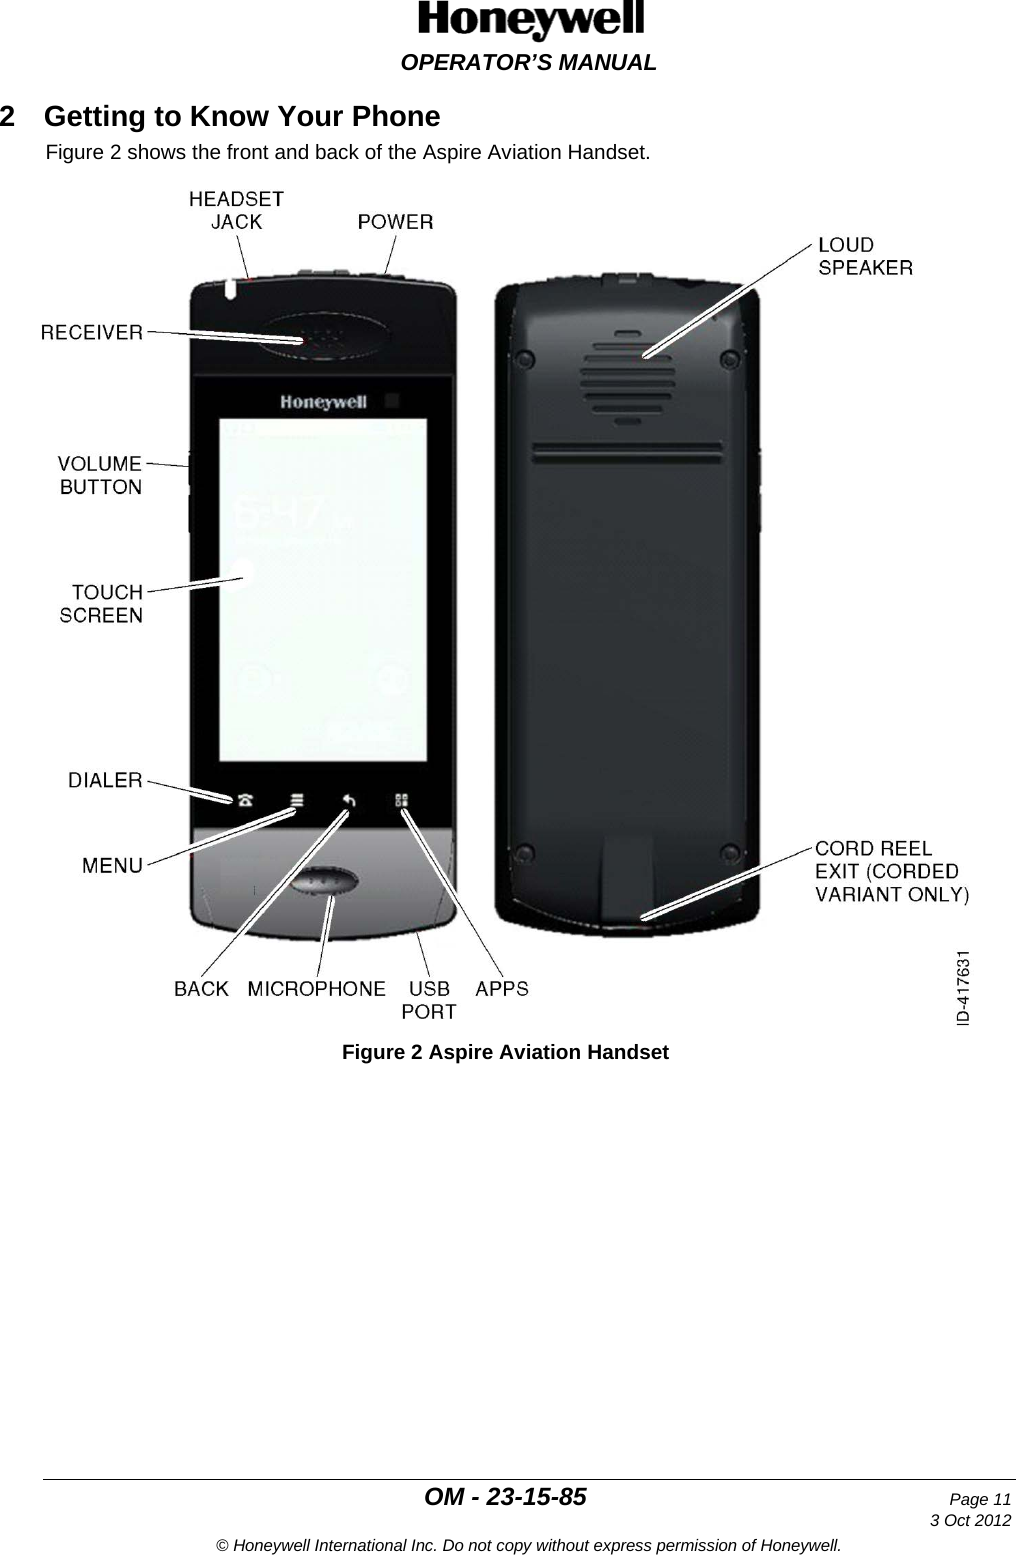  OPERATOR’S MANUAL  OM - 23-15-85 Page 11     3 Oct 2012 © Honeywell International Inc. Do not copy without express permission of Honeywell. 2  Getting to Know Your Phone Figure 2 shows the front and back of the Aspire Aviation Handset.  Figure 2 Aspire Aviation Handset    